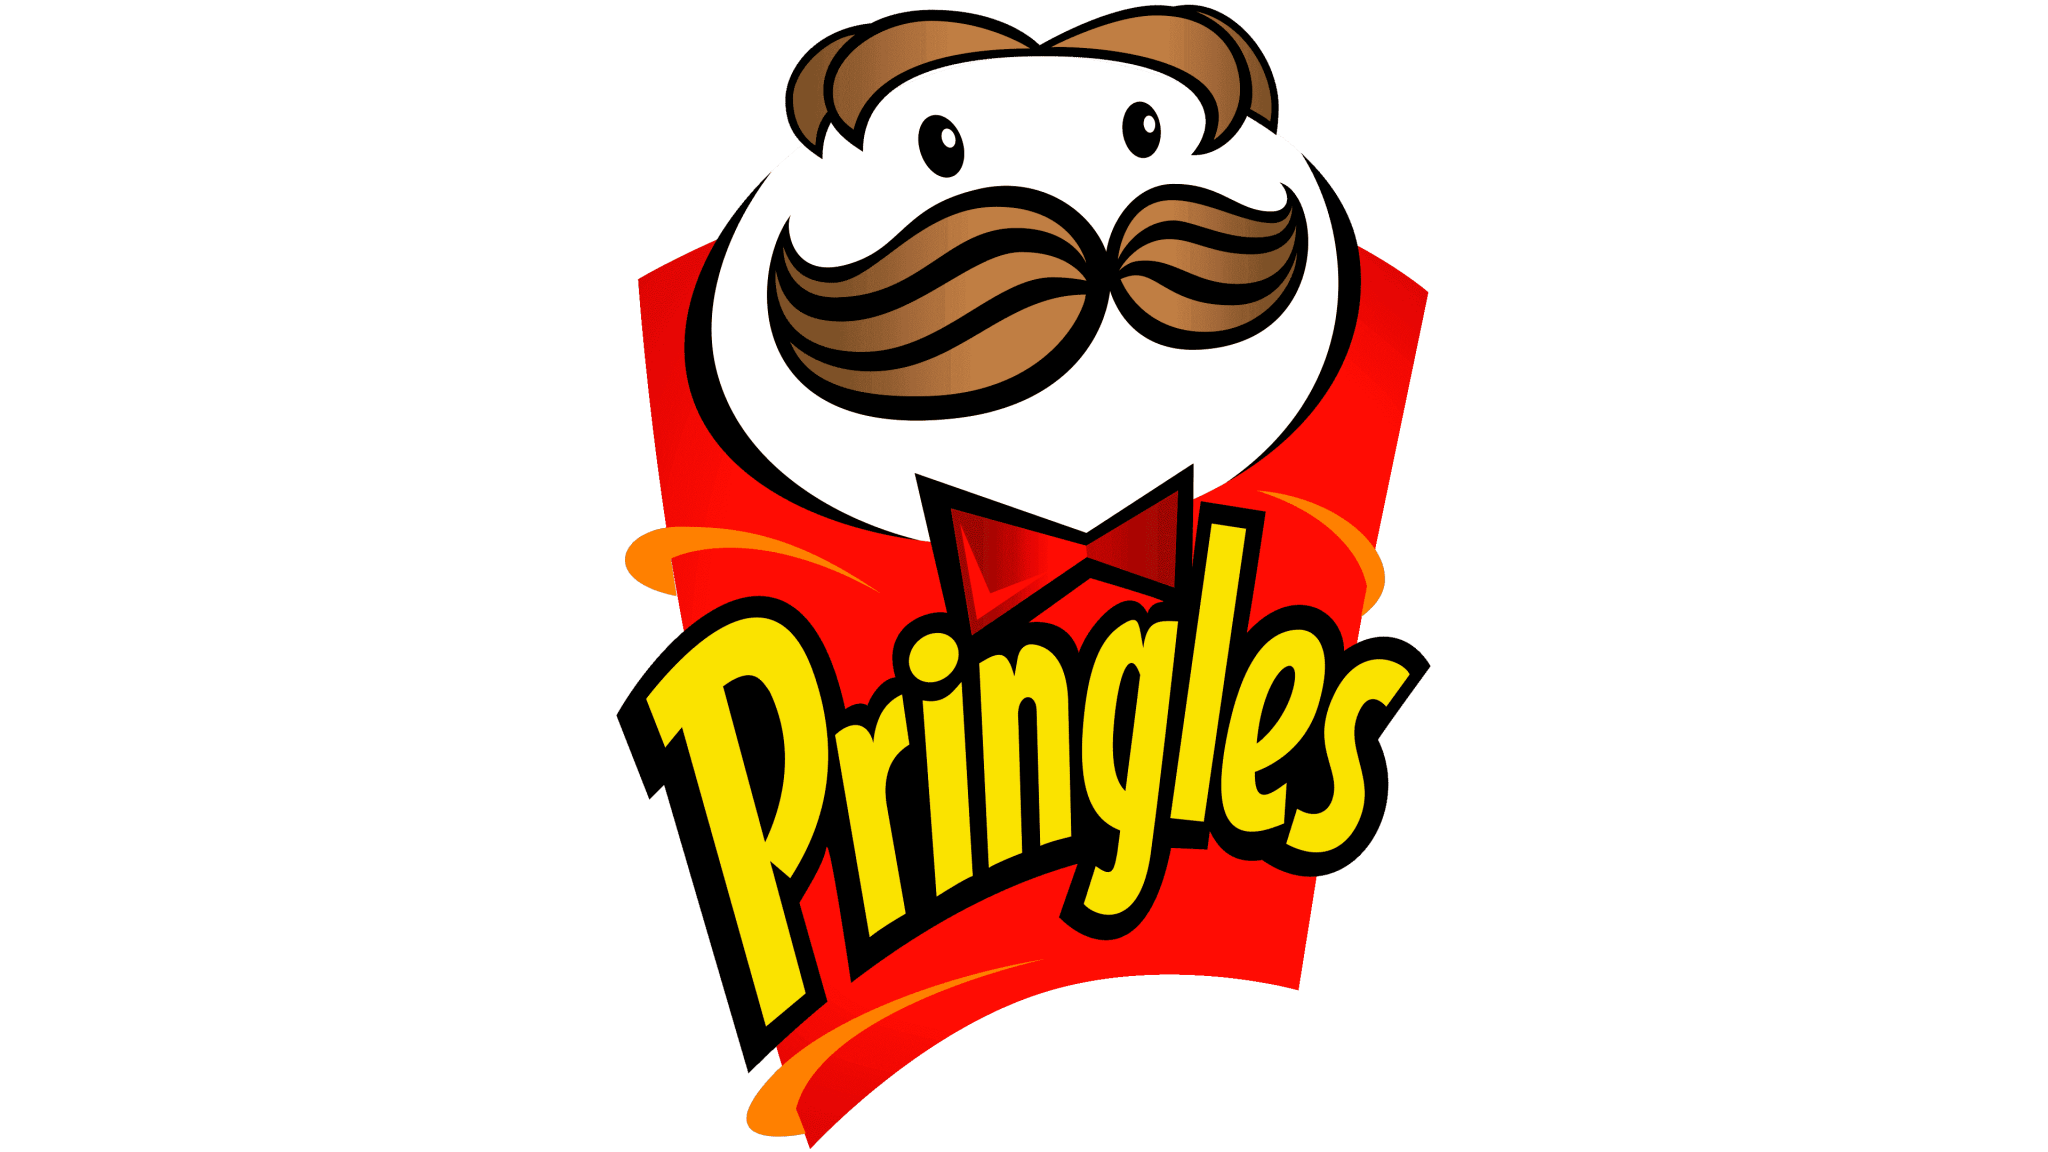 Pringles Logo and symbol, meaning, history, sign.